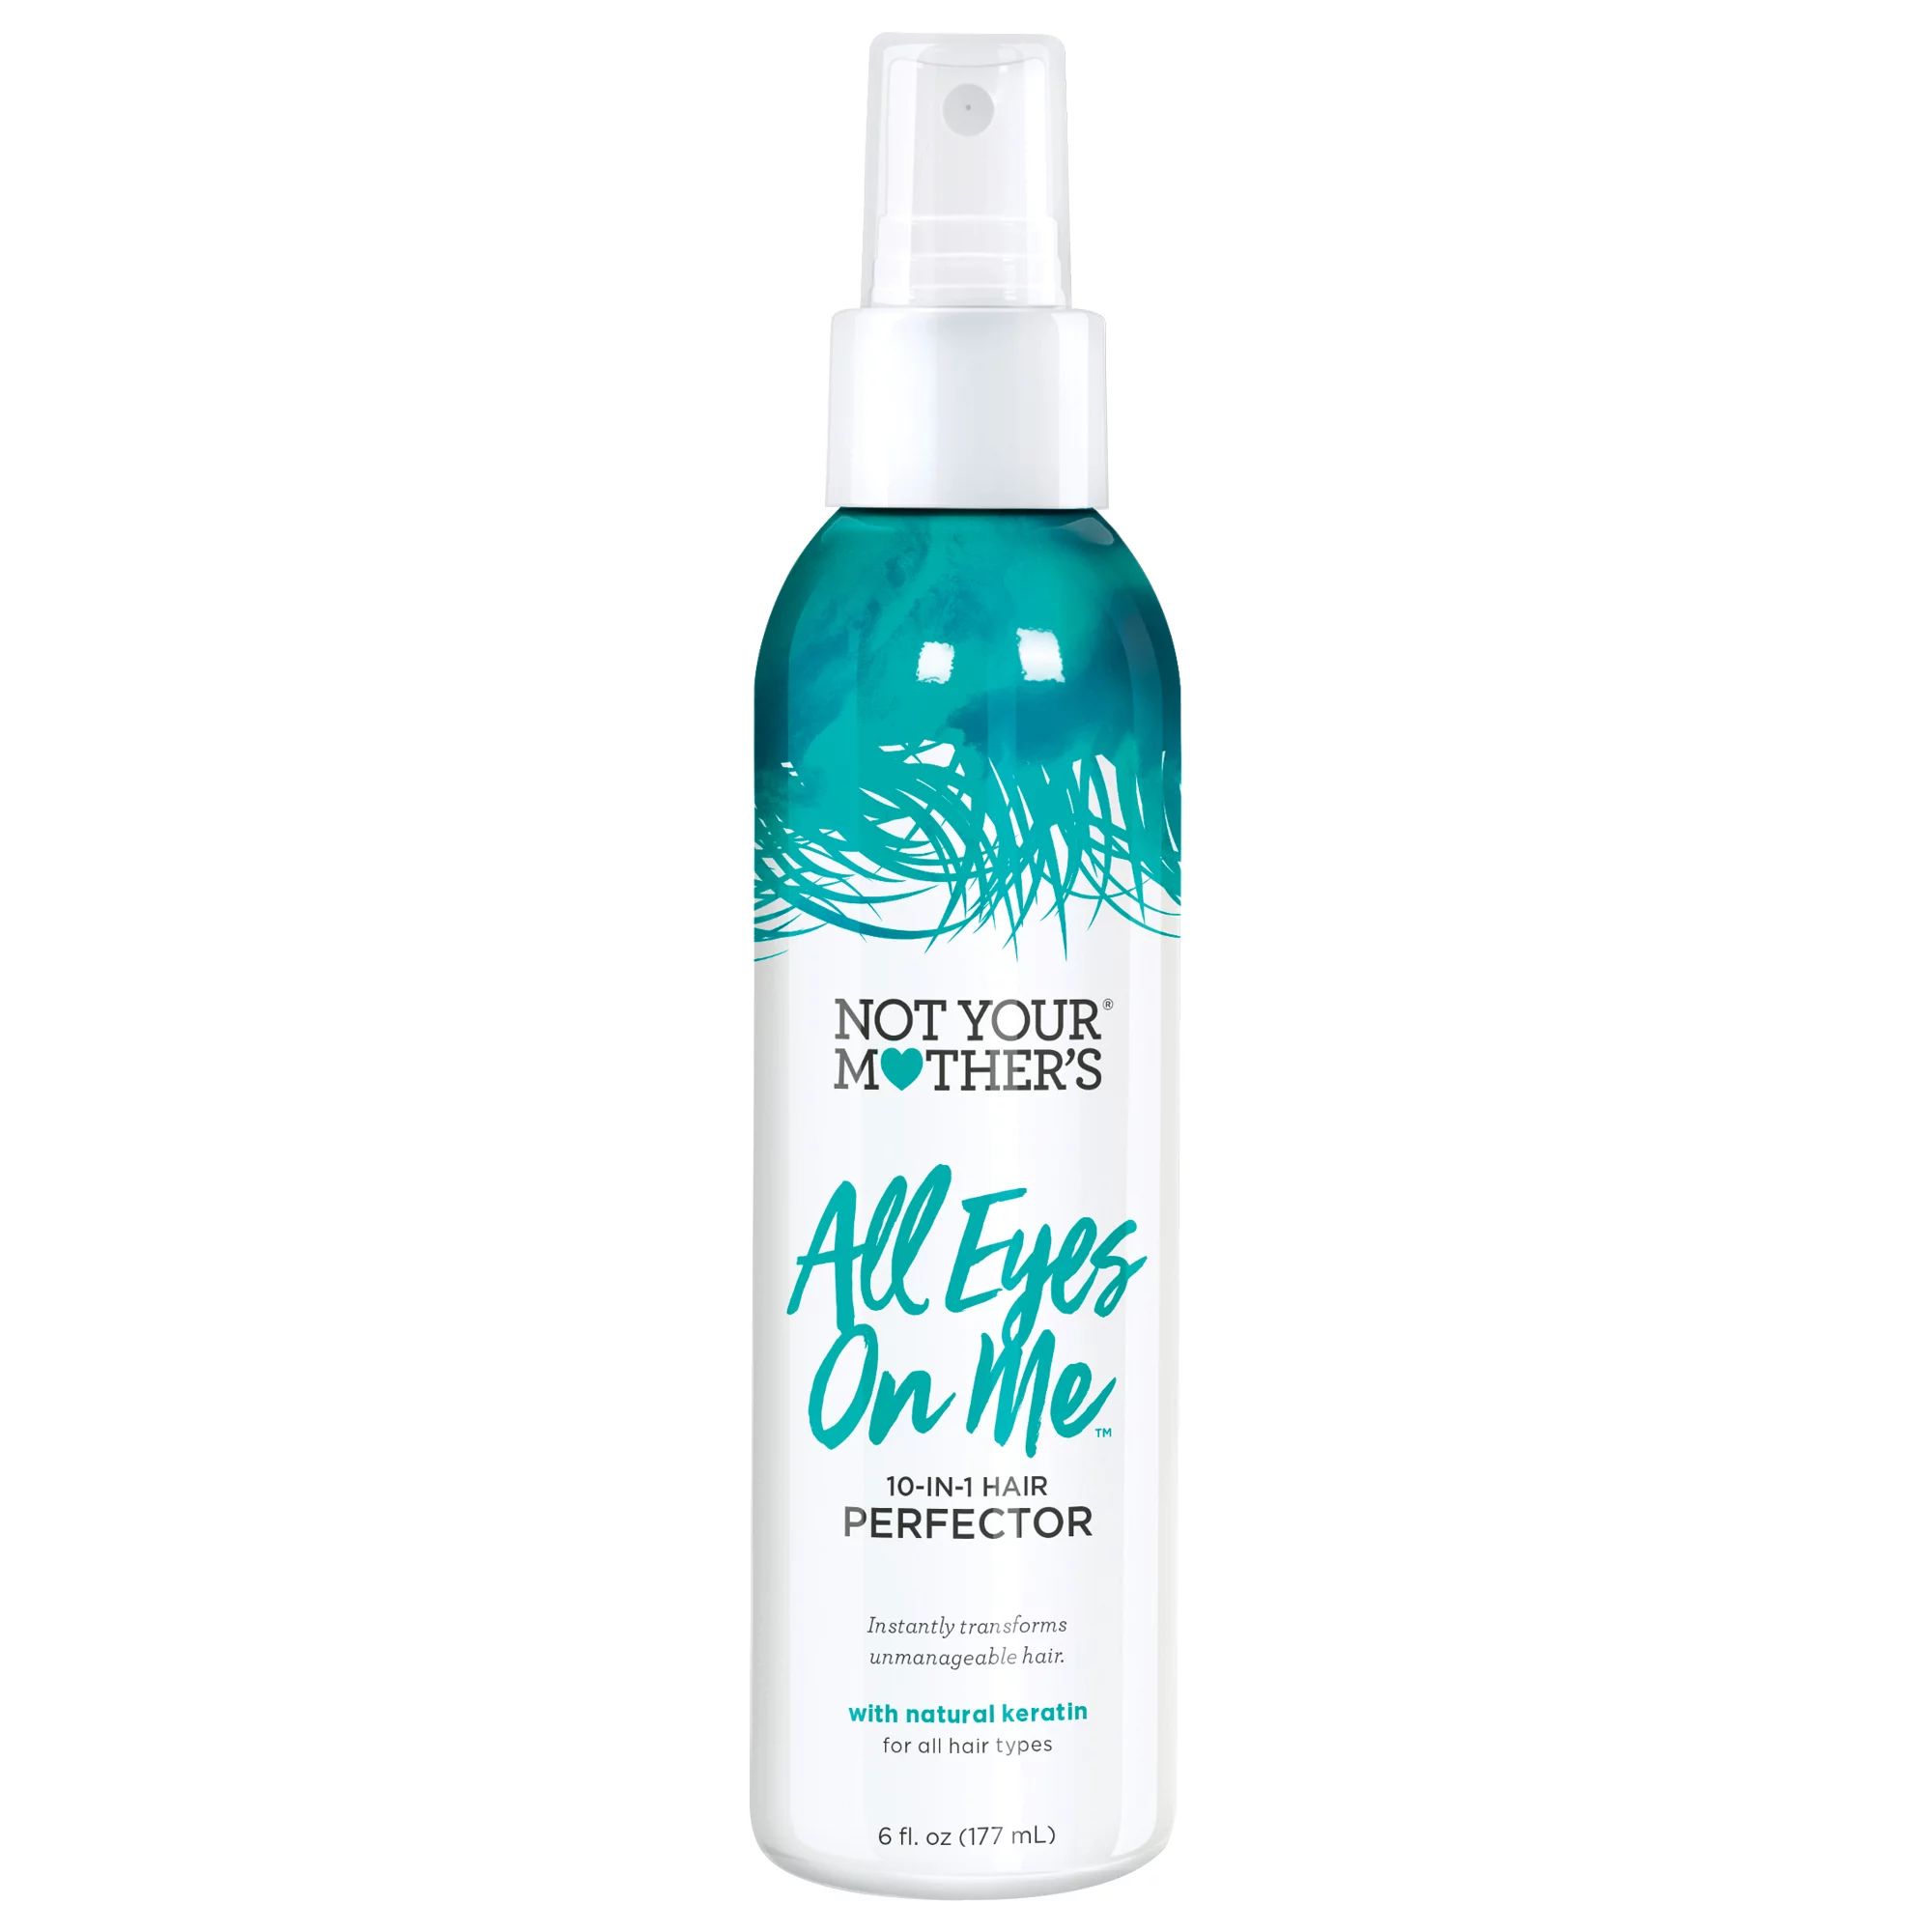 Not Your Mother's All Eyes On Me 10-in-1 Hair Perfector, 6oz | Walmart (US)